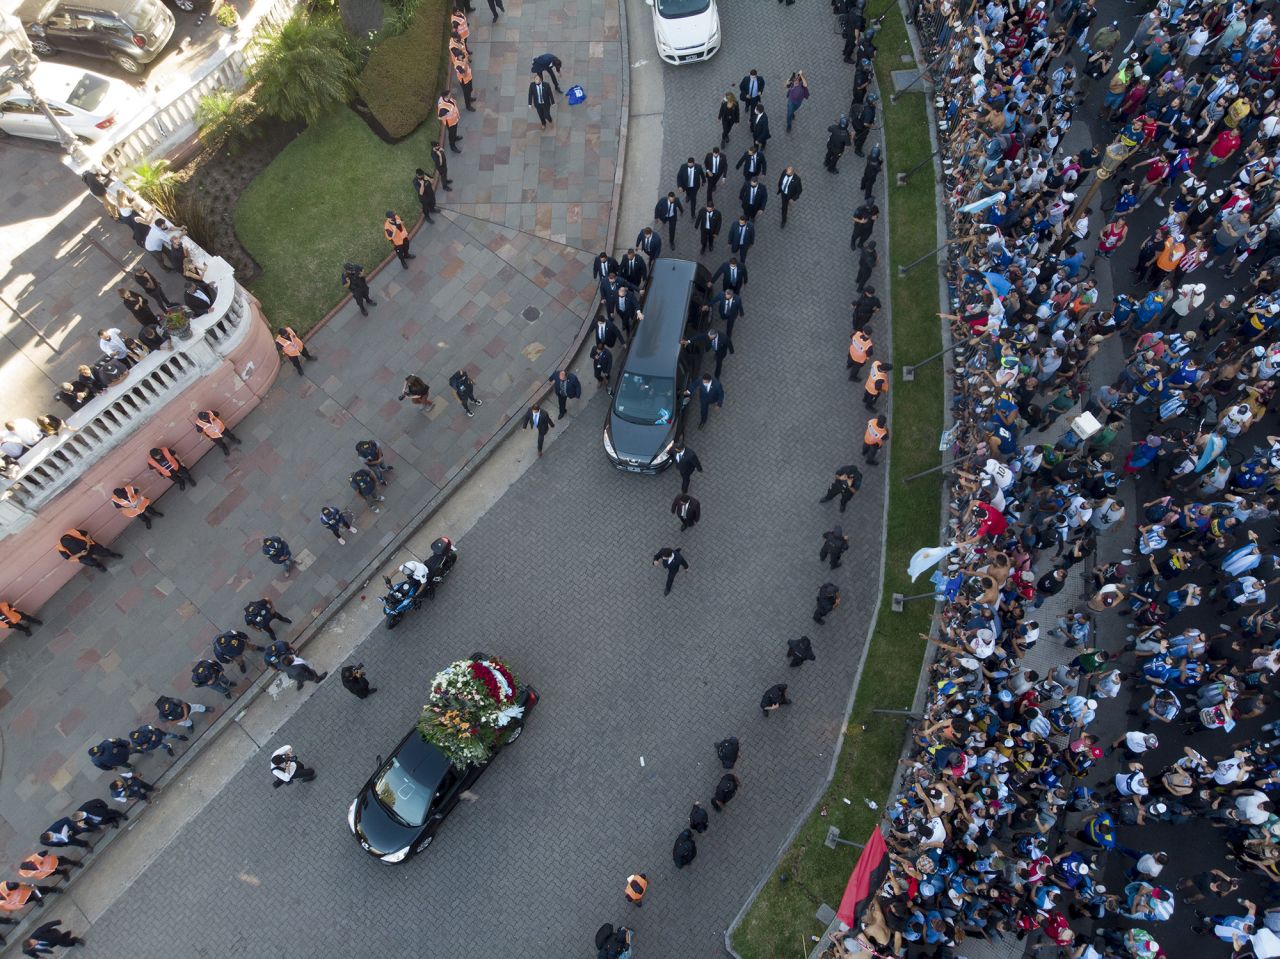 A hearse carries the casket of <a href="https://www.cnn.com/2020/11/25/football/gallery/diego-maradona/index.html" target="_blank">soccer legend Diego Maradona</a> past the government house in Buenos Aires on Thursday, November 26. Maradona, one of the all-time greats who captained Argentina to victory at the 1986 World Cup, died at the age of 60.